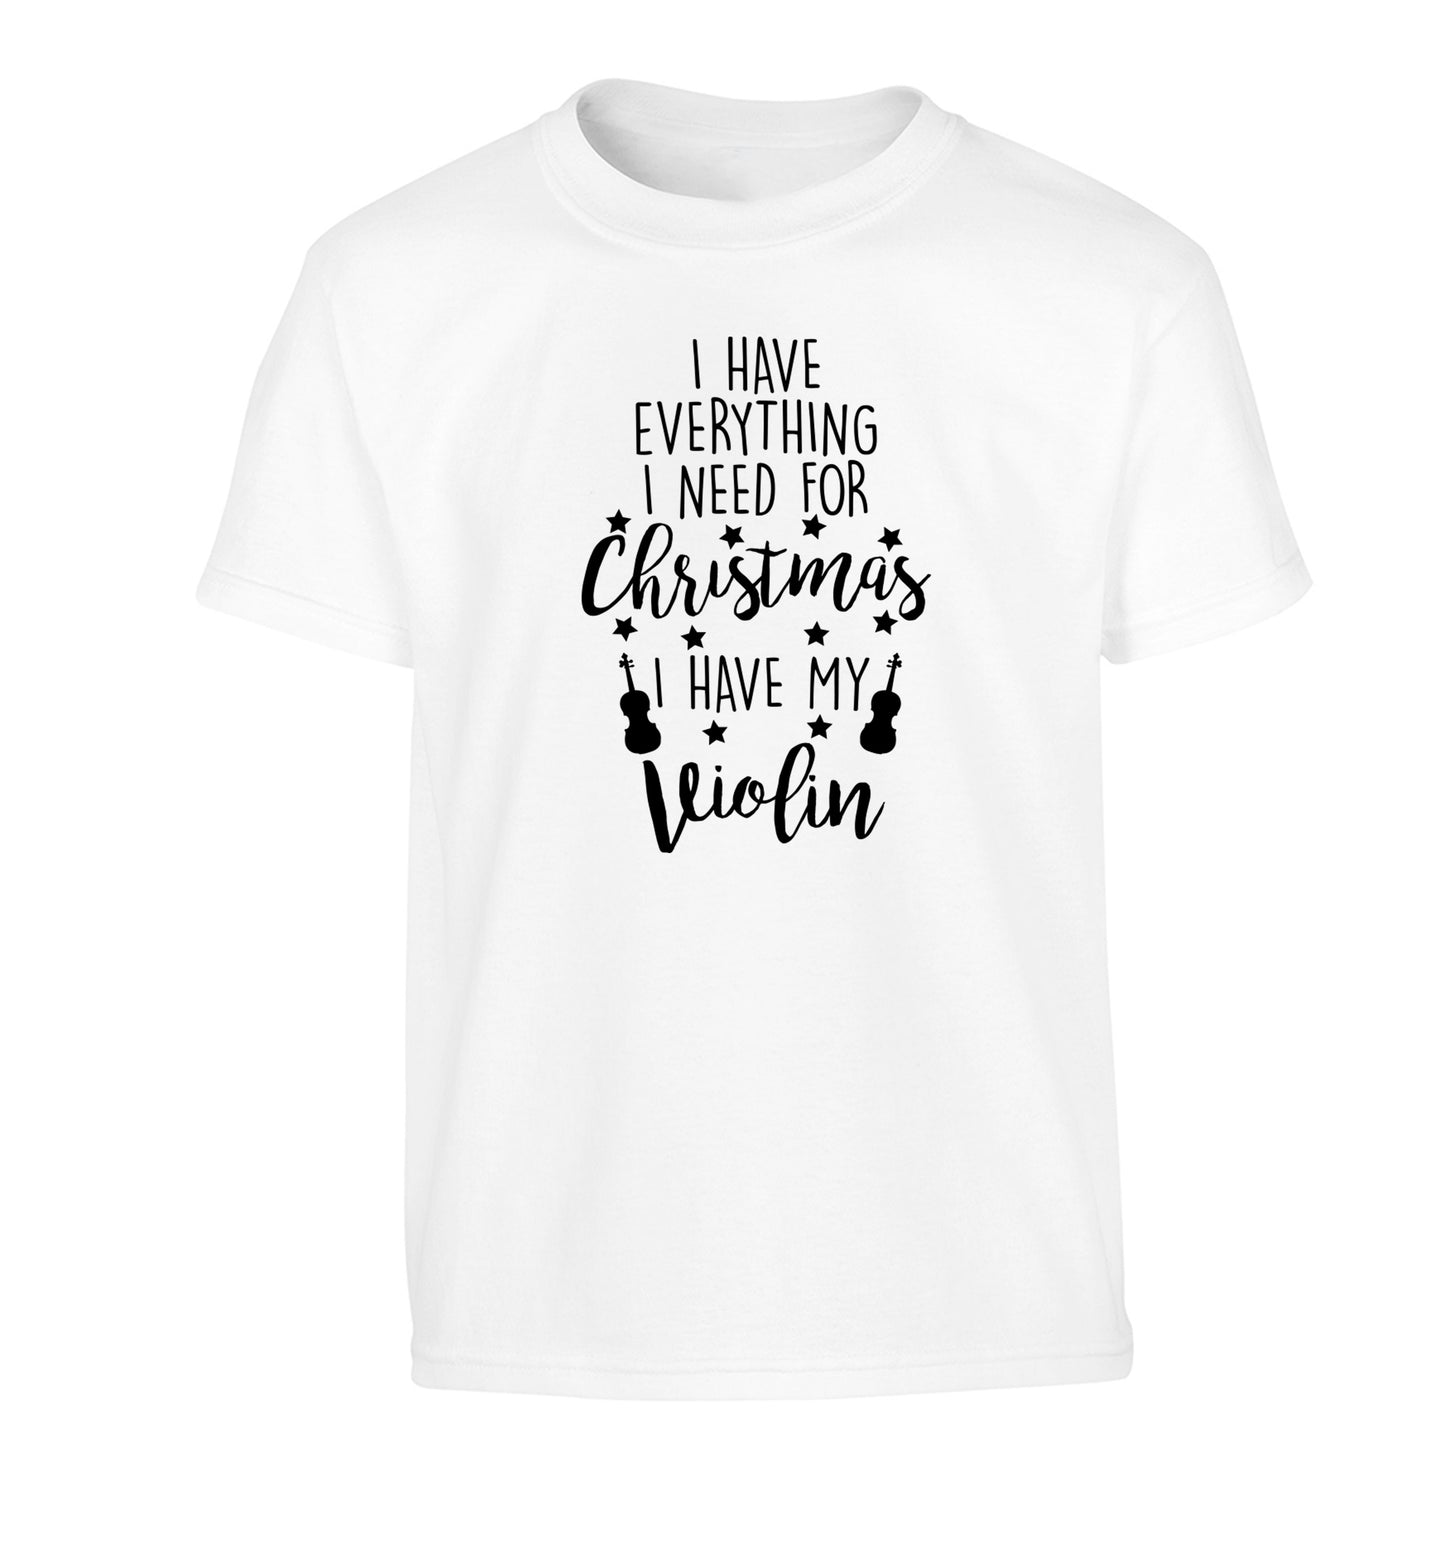 I have everything I need for Christmas I have my violin Children's white Tshirt 12-13 Years